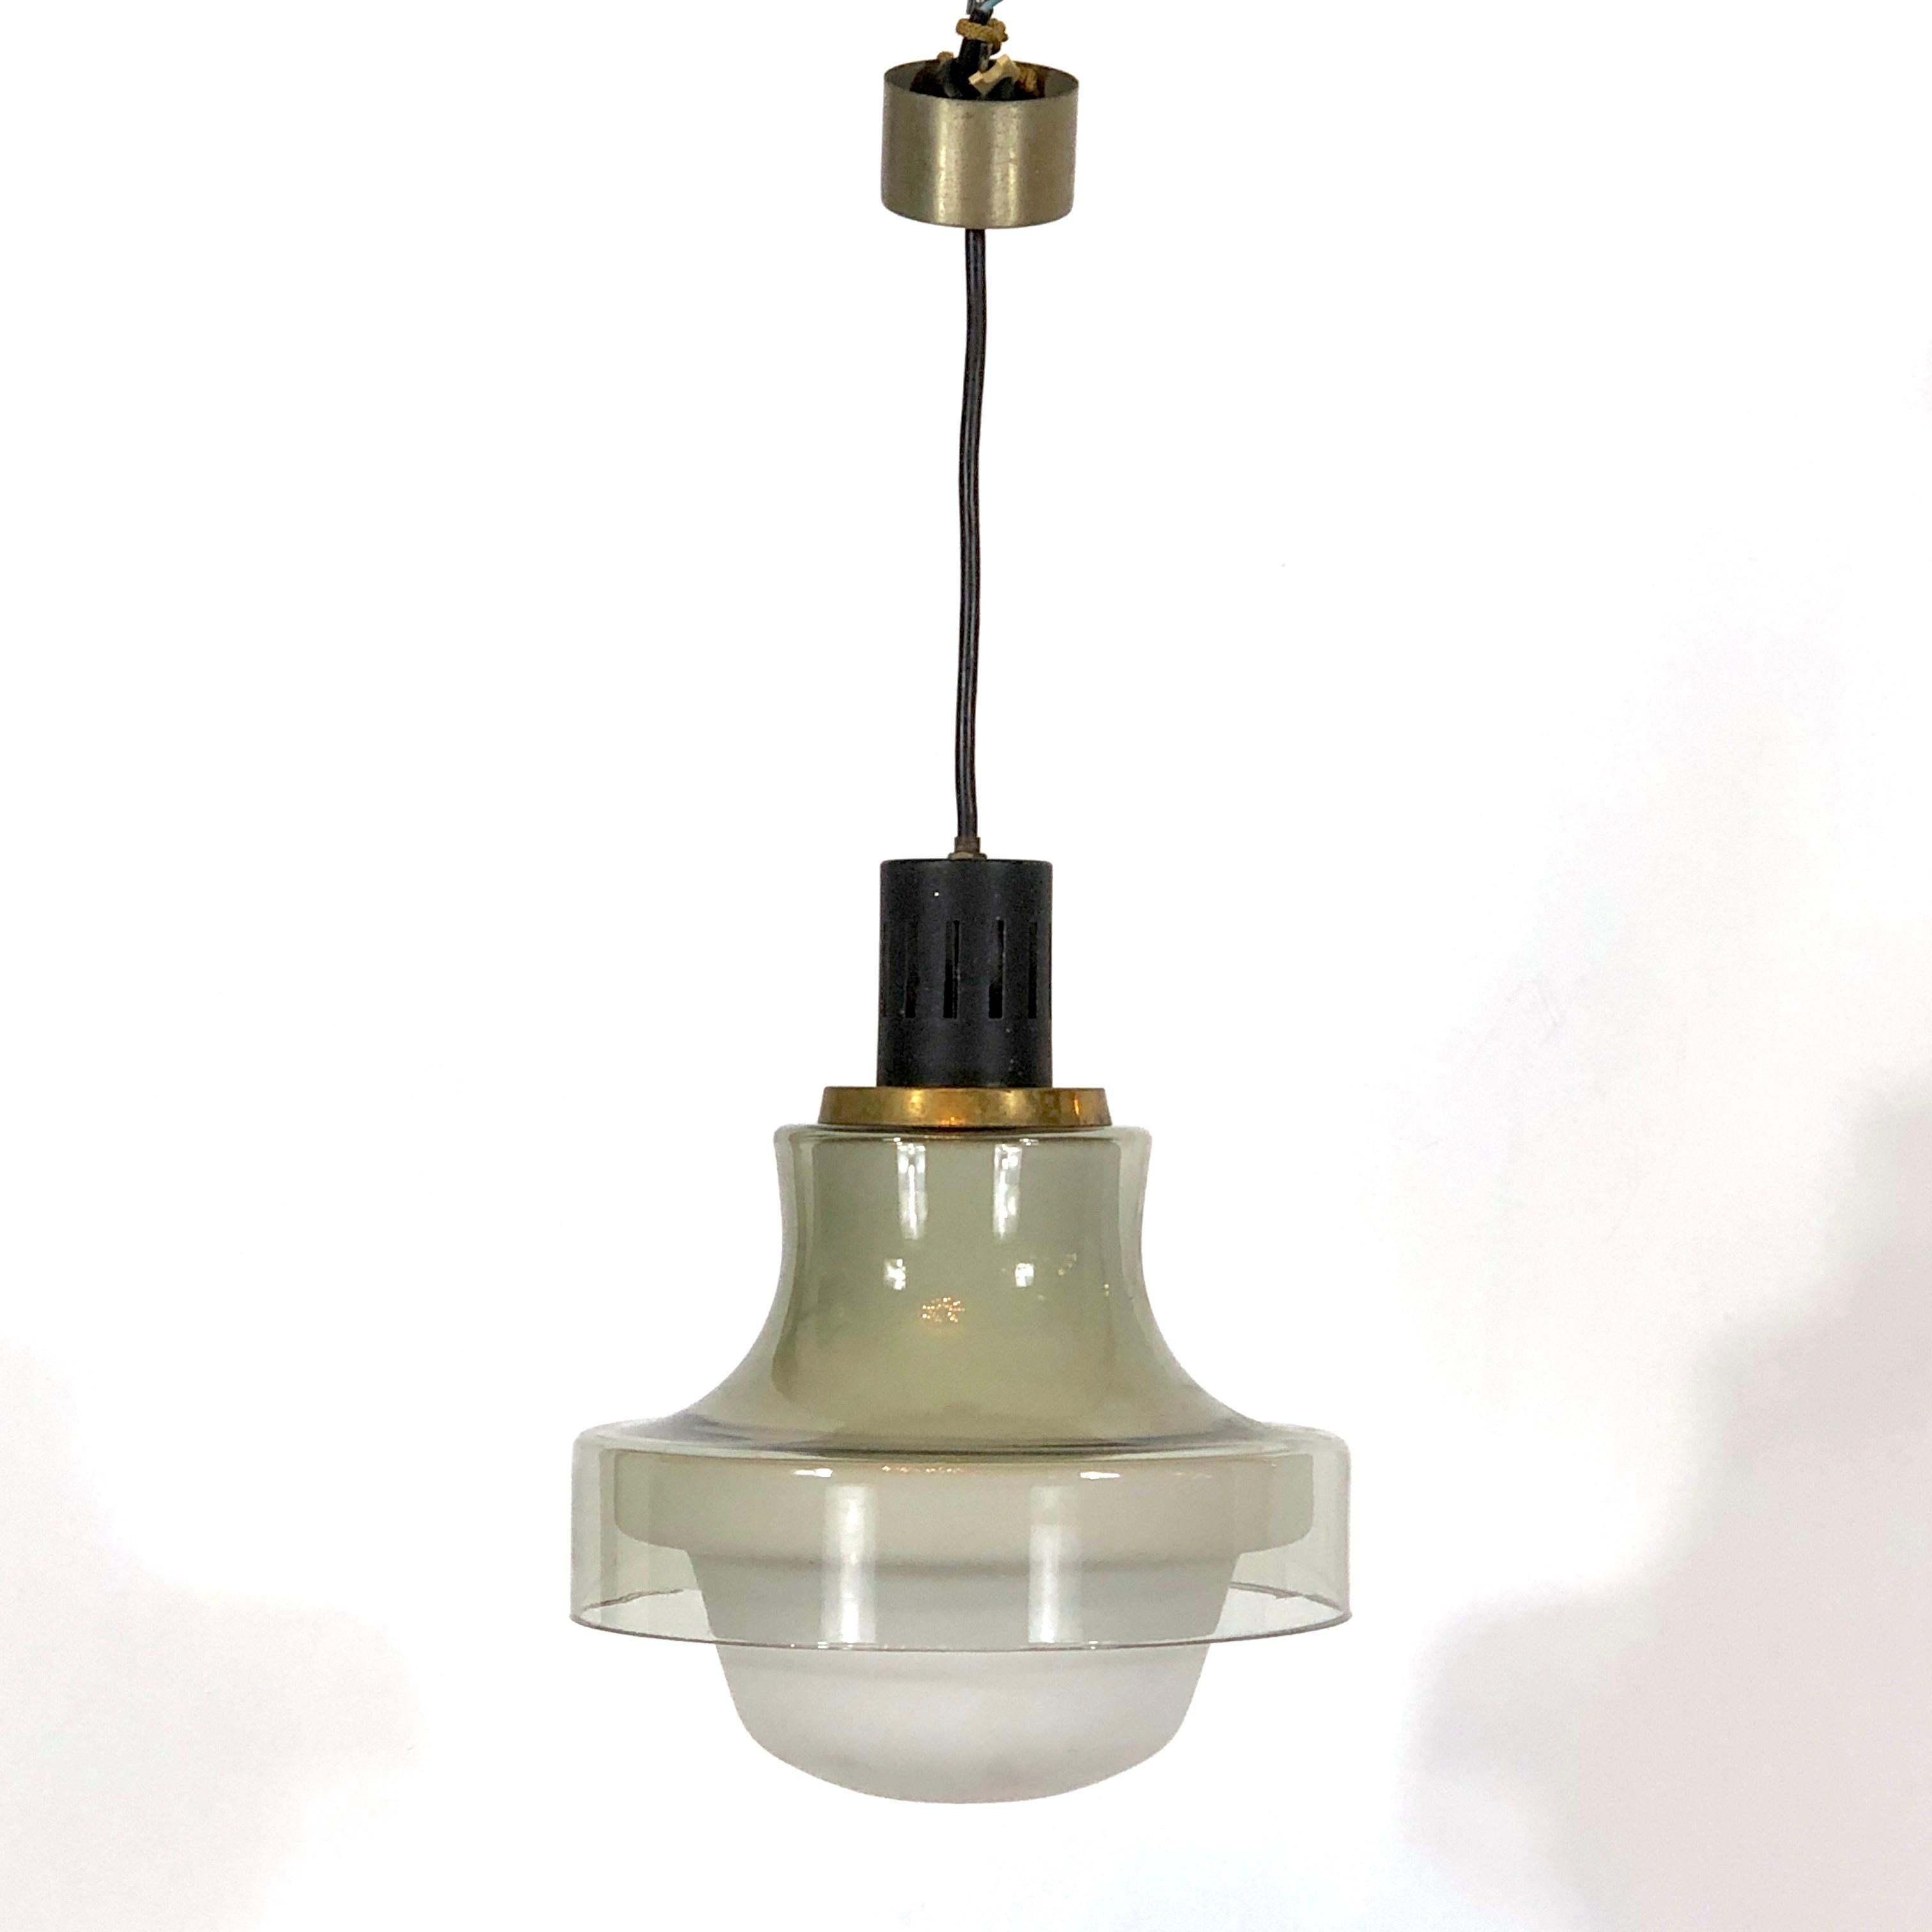 Great vintage condition with normal trace of age and use for this pendant lamp manufactured by Stilnovo during the 50s. Made from brass, lacquer, opaline glass, glass. No cracks or chips. Full working with EU standard, adaptable on demand for USA